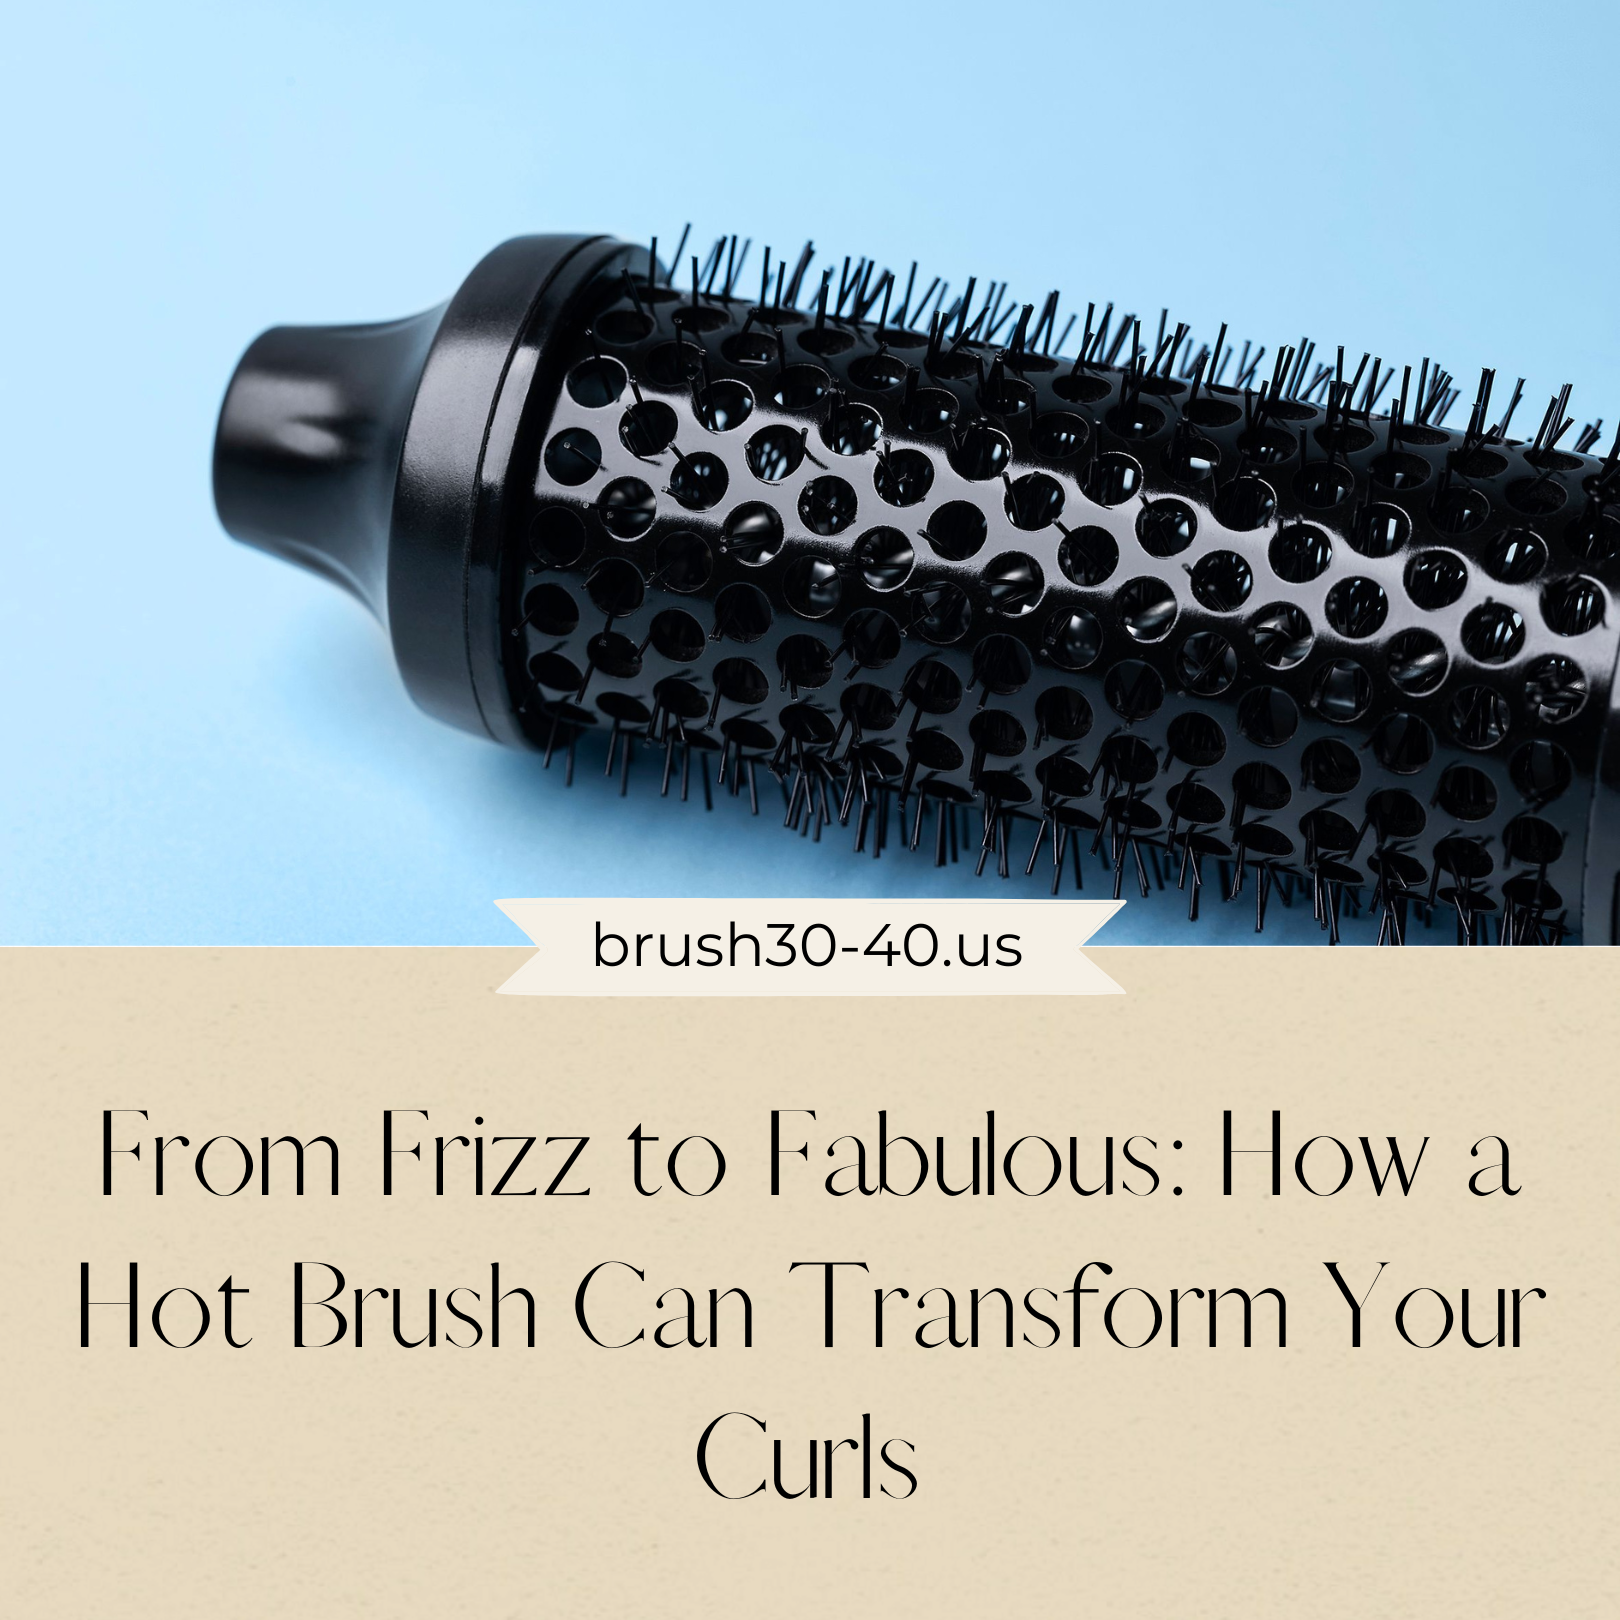 From Frizz to Fabulous: How a Hot Brush Can Transform Your Curls